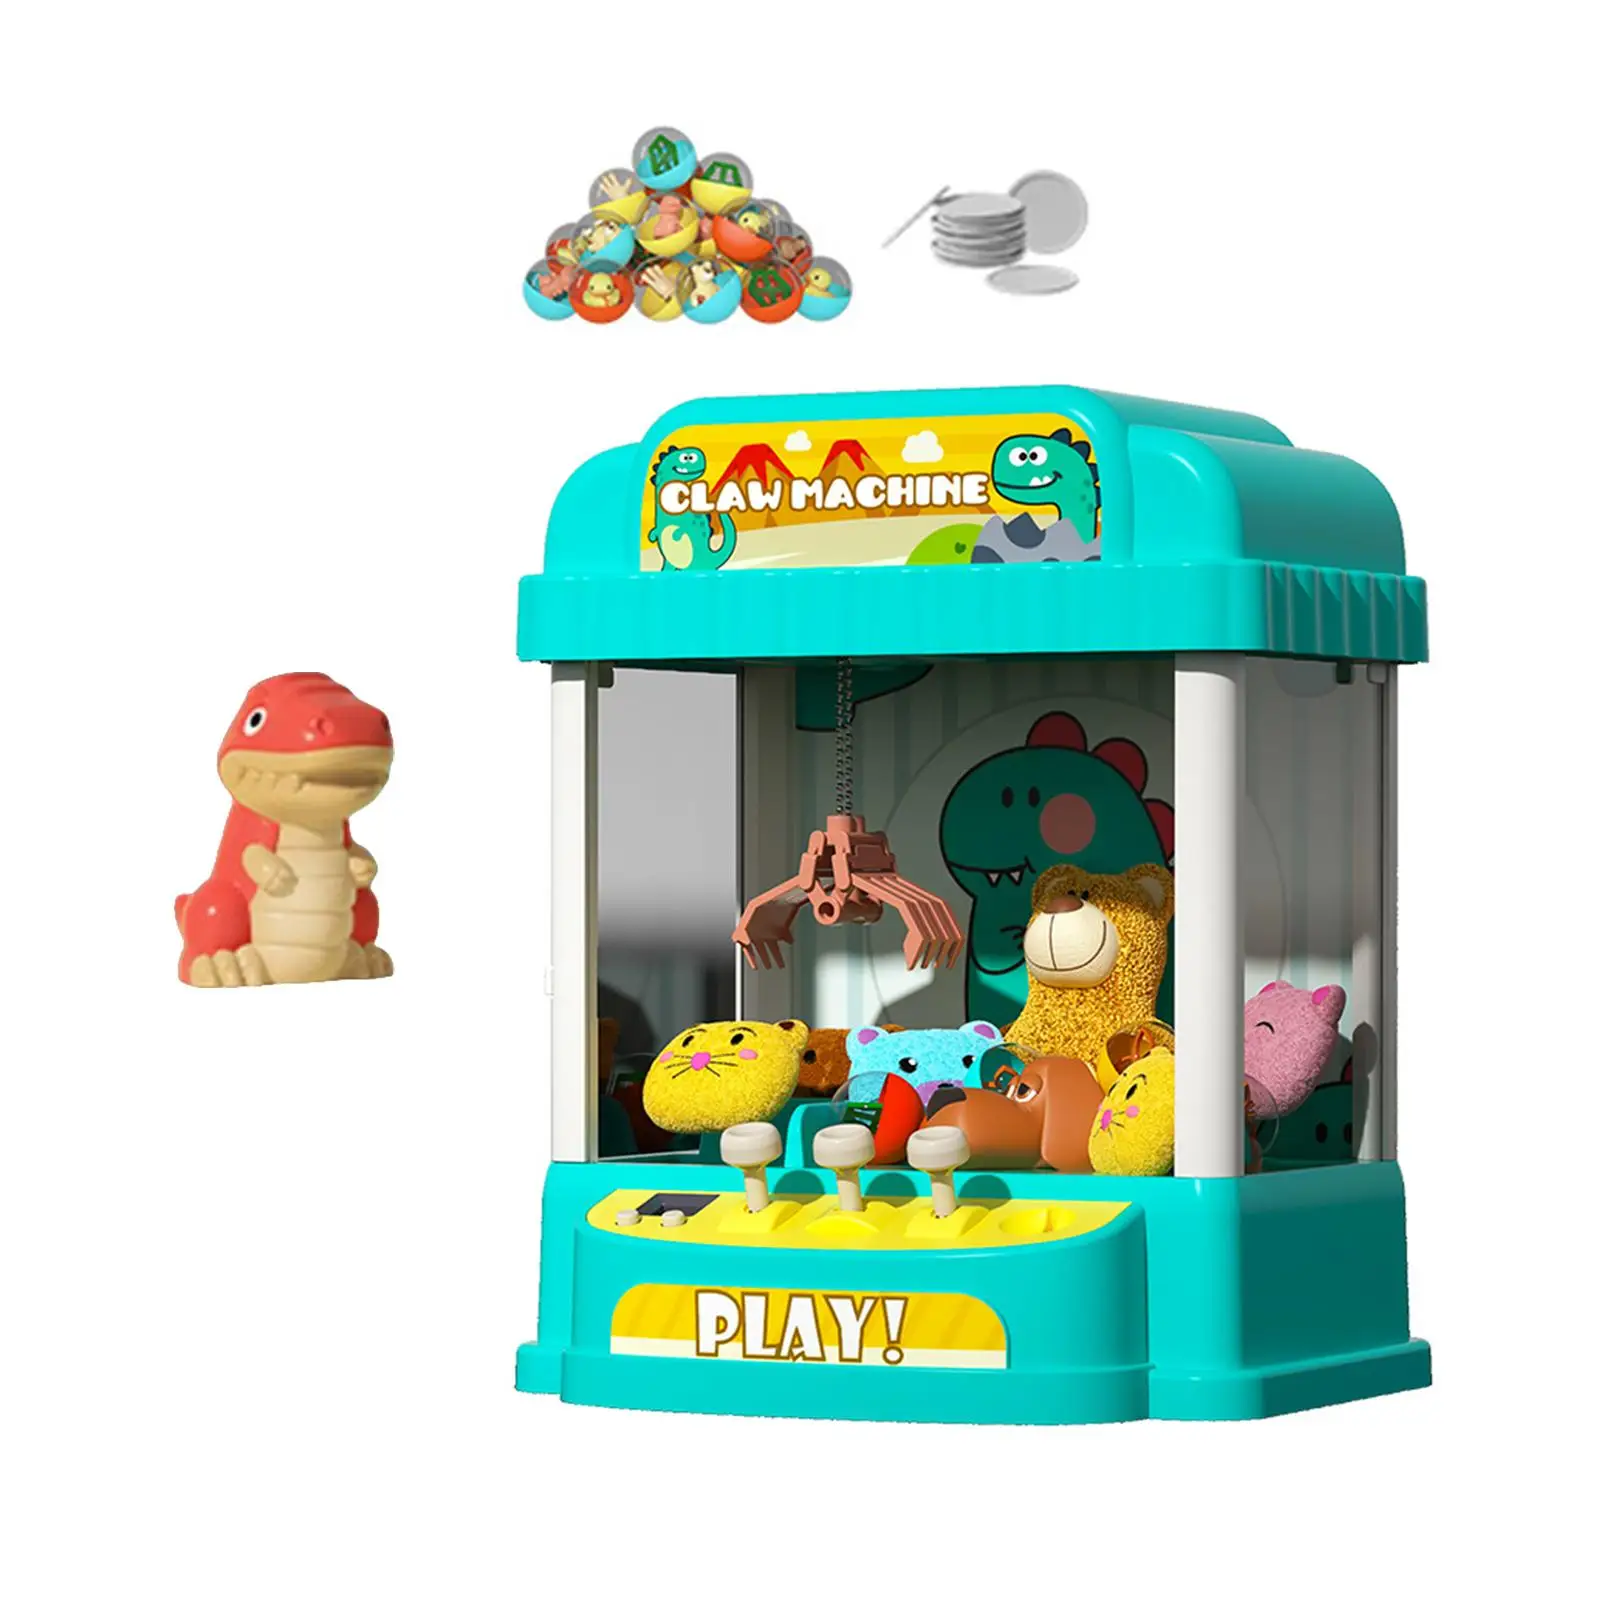 Portable Claw Machine Vending Machine Prize Dispenser Electric Claw Machine for Children Toddlers Boys Kids Birthday Gifts